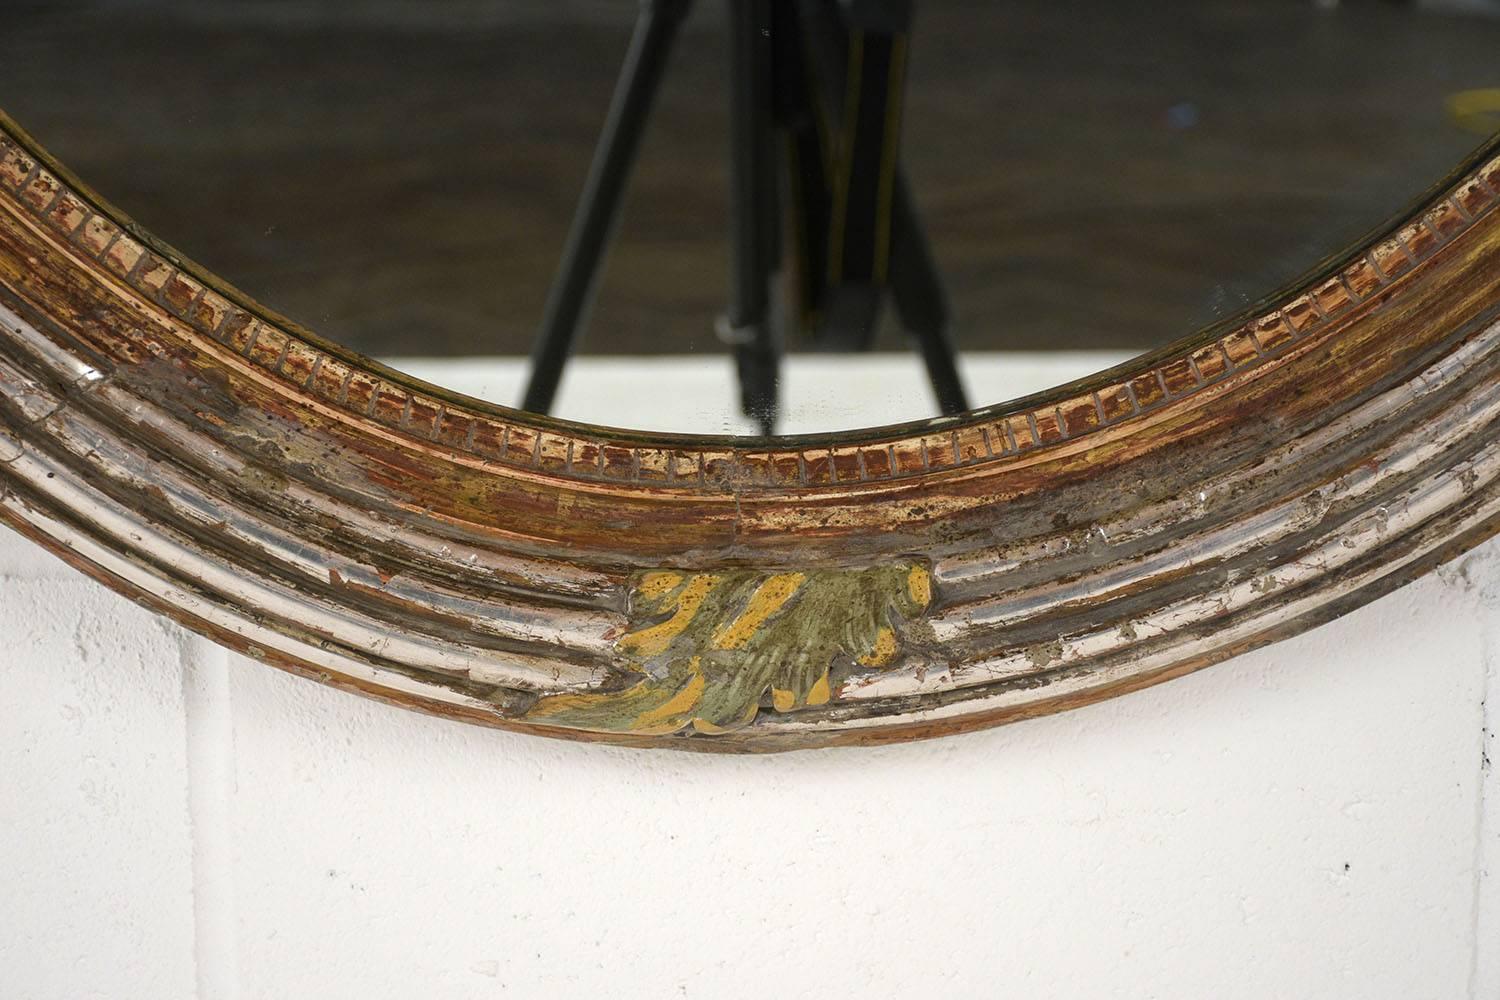 This Late 19th Century French Louis XVI Style Oval Wall Mirror features a stunning handcrafted giltwood frame with carved leafy and fluted details and is in great condition. The frame is adorned with silver leaf & gold leaf accents and has its